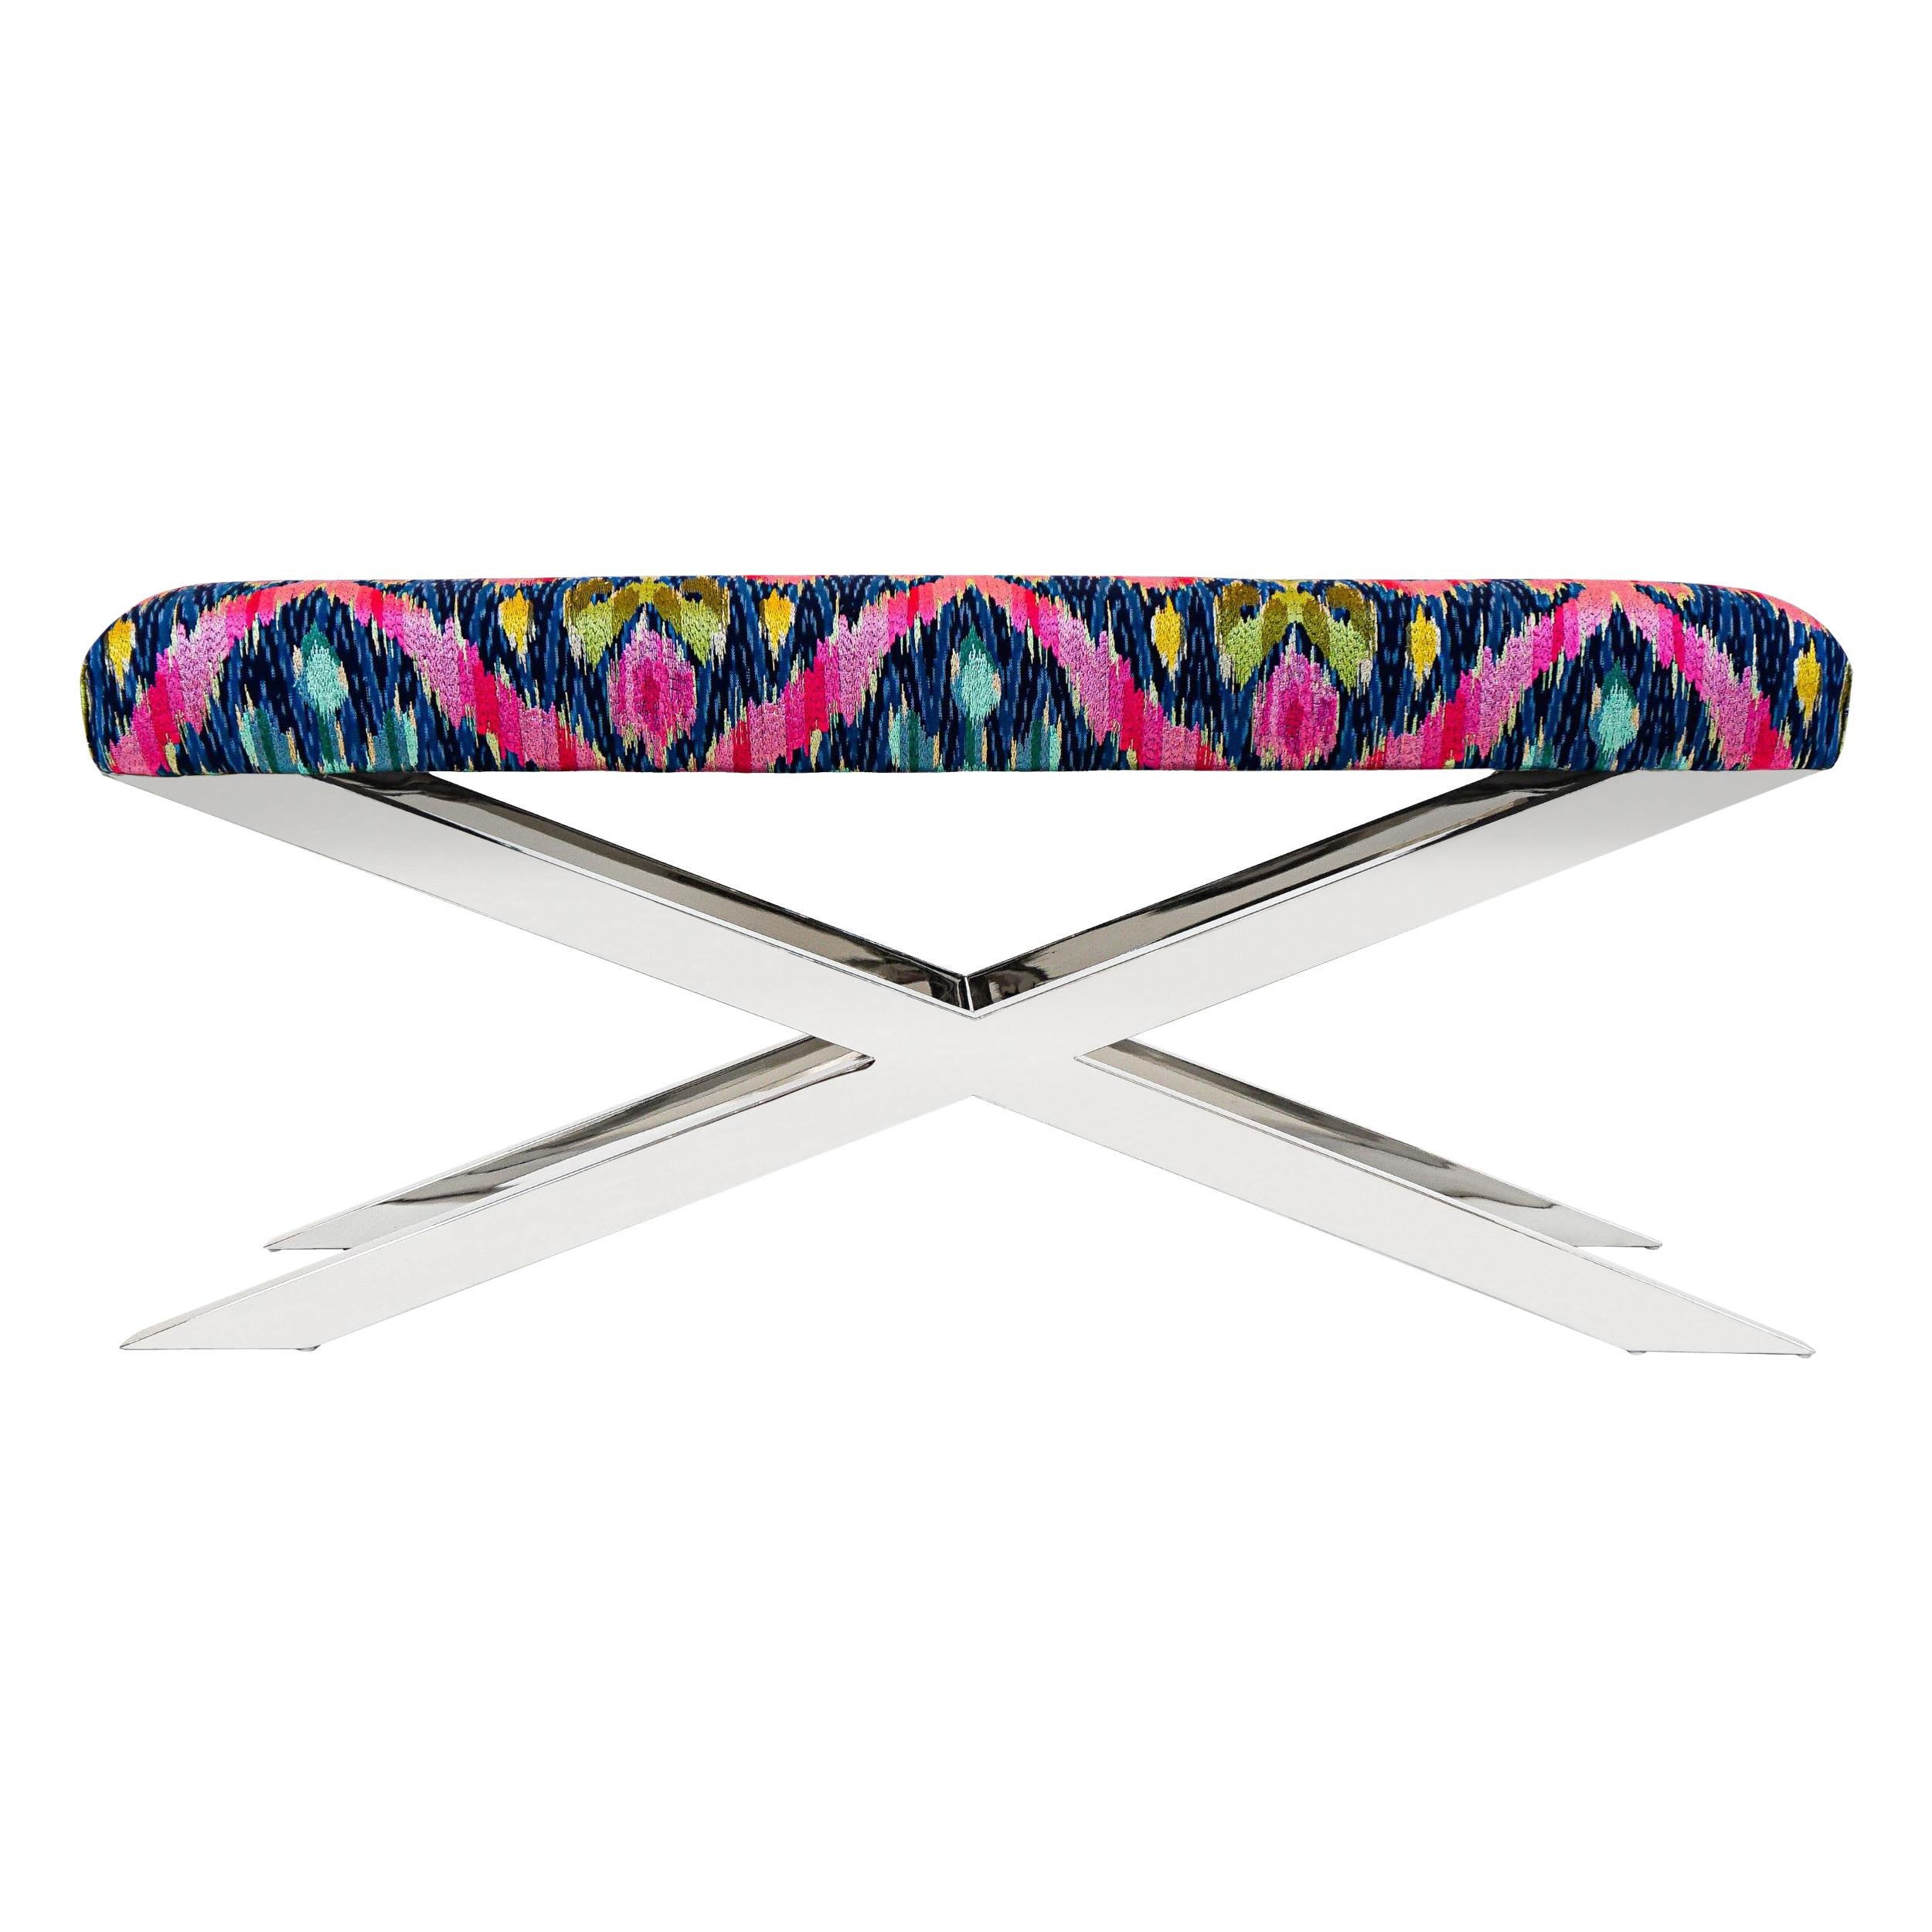 Modern Multi-Colored Ikat Woven Fabric Bench with X Crossed Legs